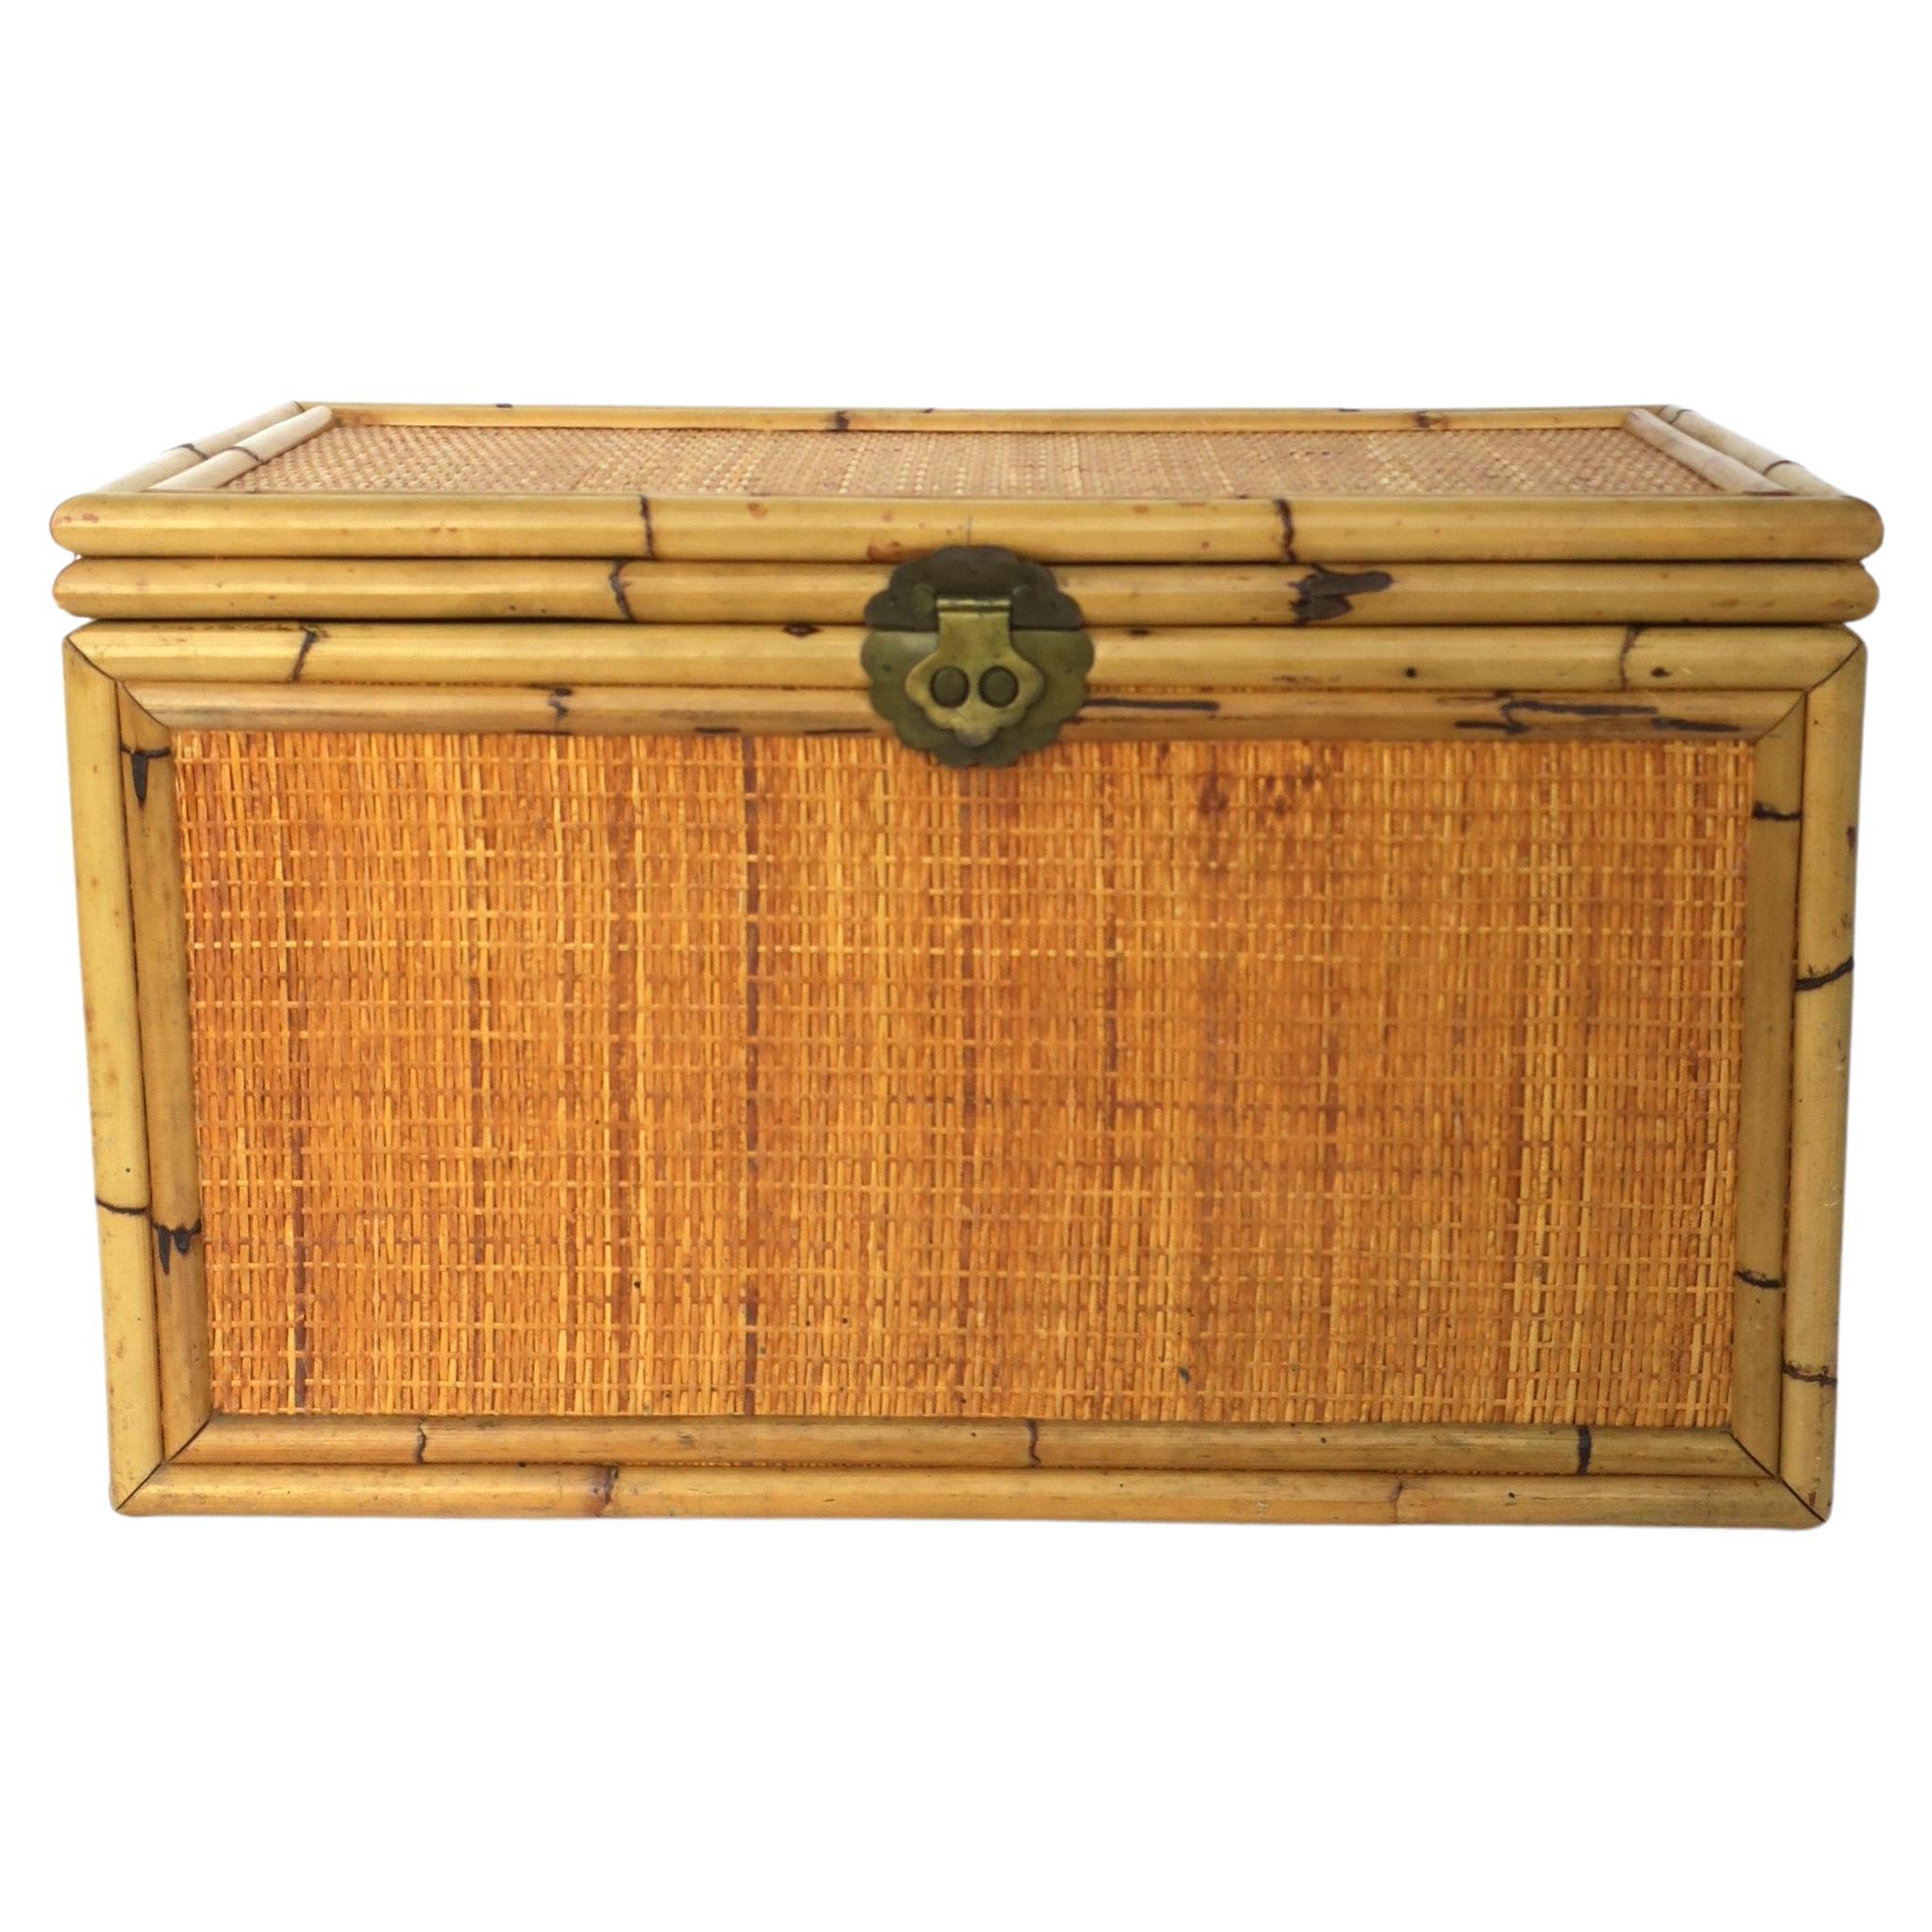 Wicker Rattan Storage Chest Trunk Box or Cocktail Table